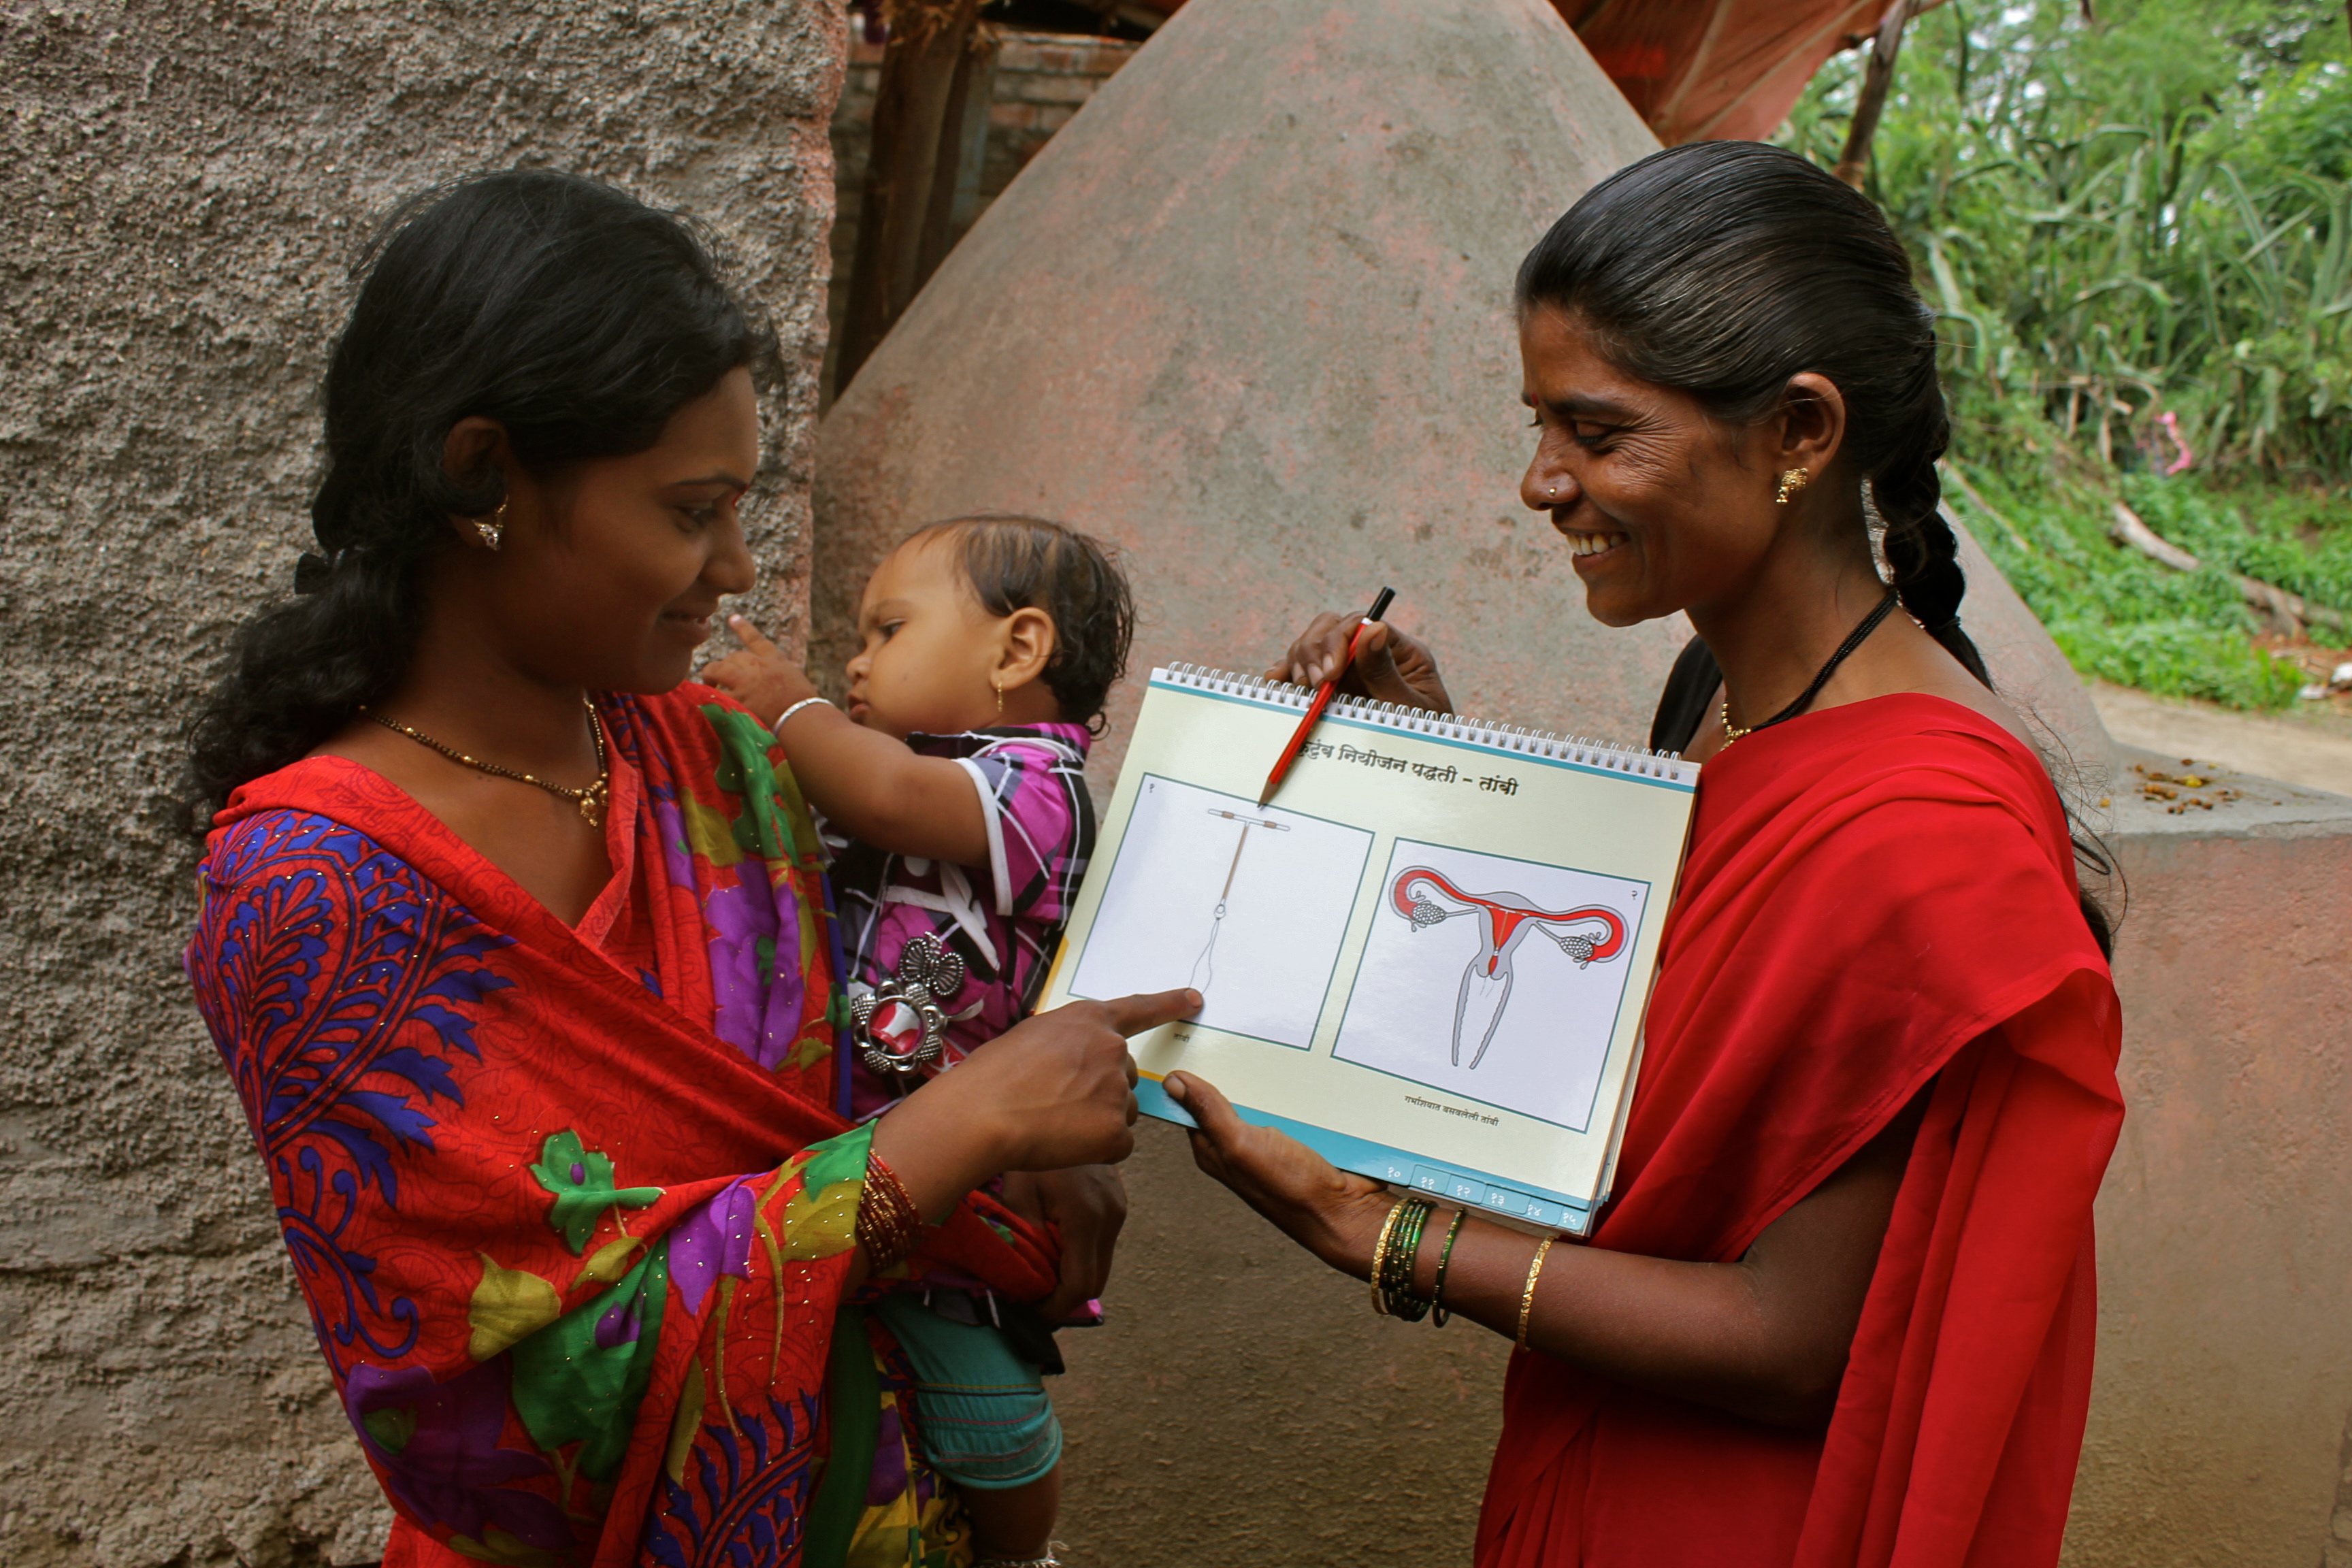 Married adolescent girls were offered reproductive health advice as part of the project.